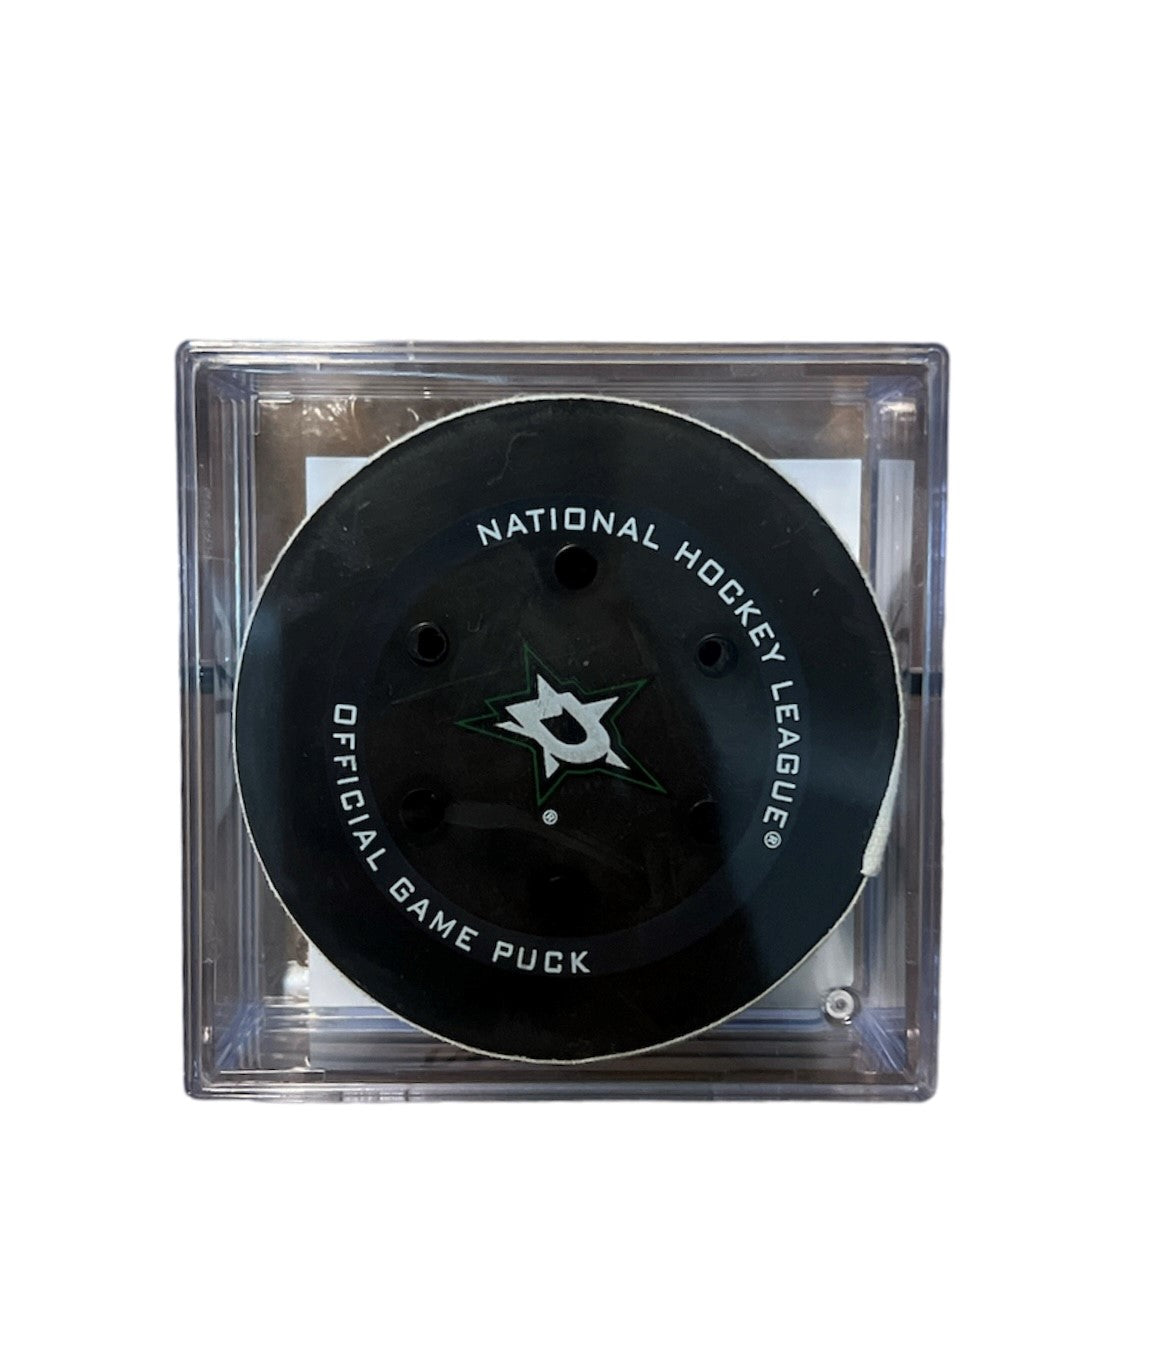 PHOTO OF GOAL PUCK